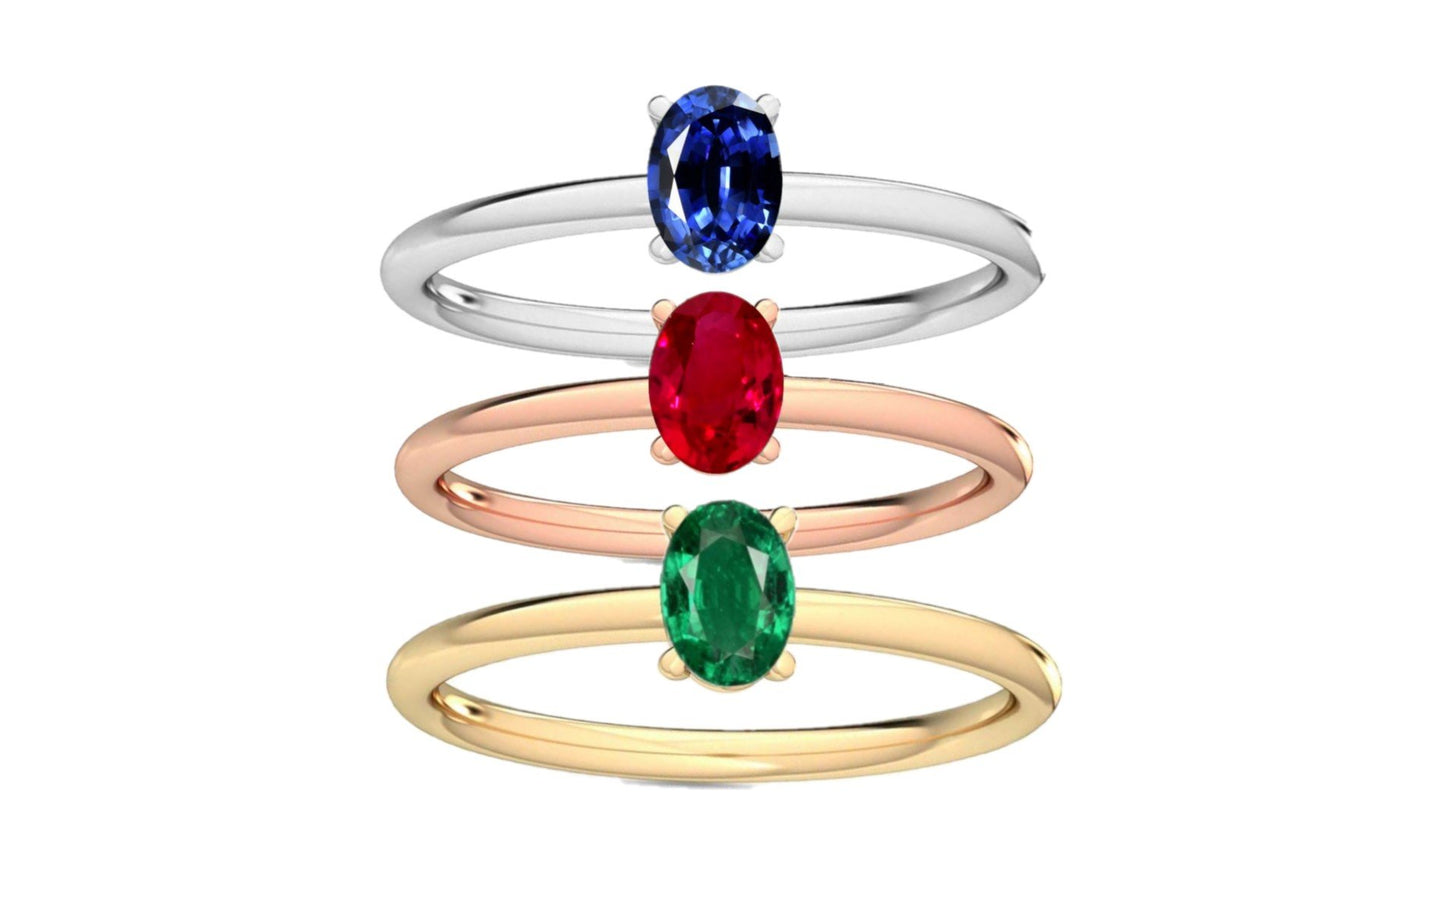 Choice of Emerald Ruby Sapphire Petite-Minimalist Solitaire Ring for Women,-14k-White-Rose-Yellow-Gold, Fine Jewelry